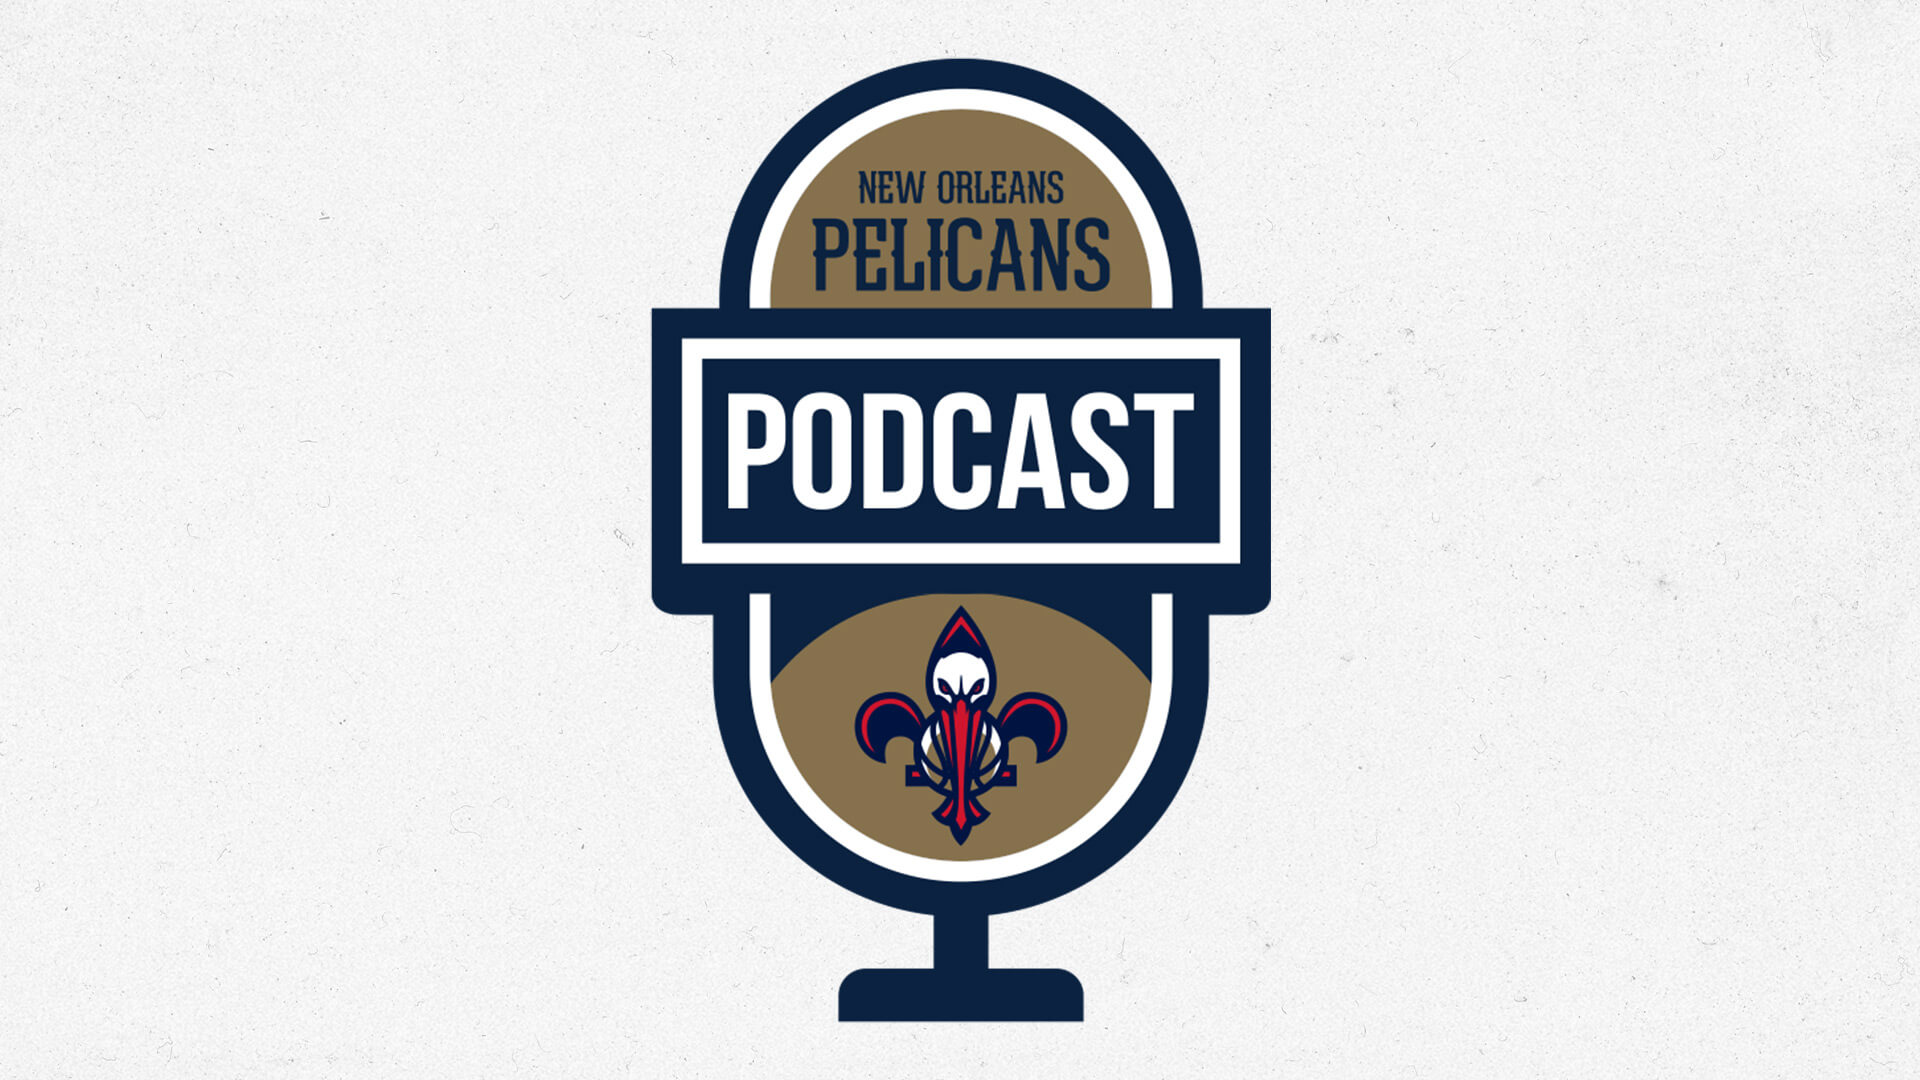 Pelicans vs. Kings Play-In, radio roundtable playoff draft | Pelicans Podcast